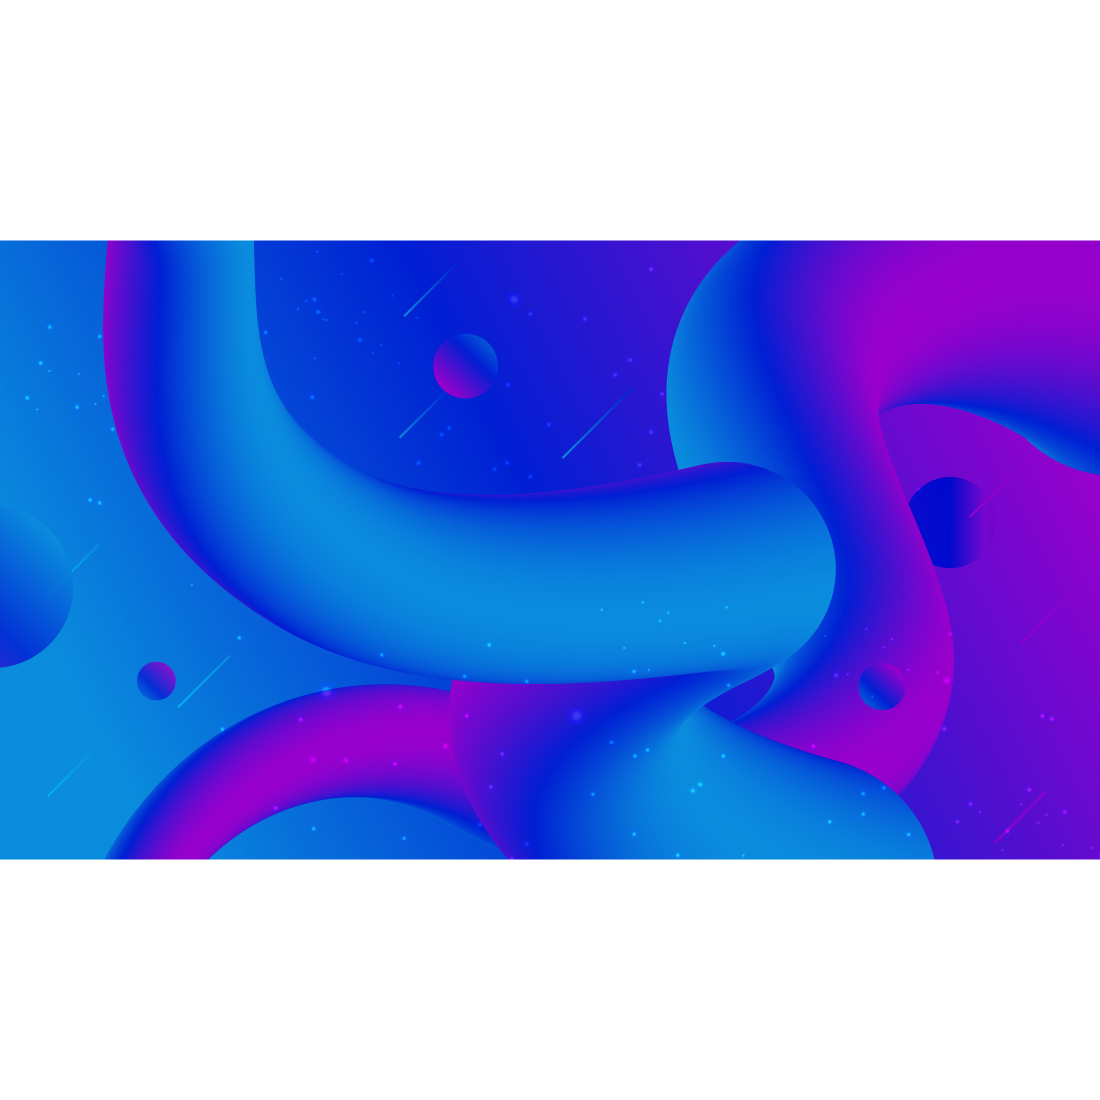 Liquid color abstract background cover image.